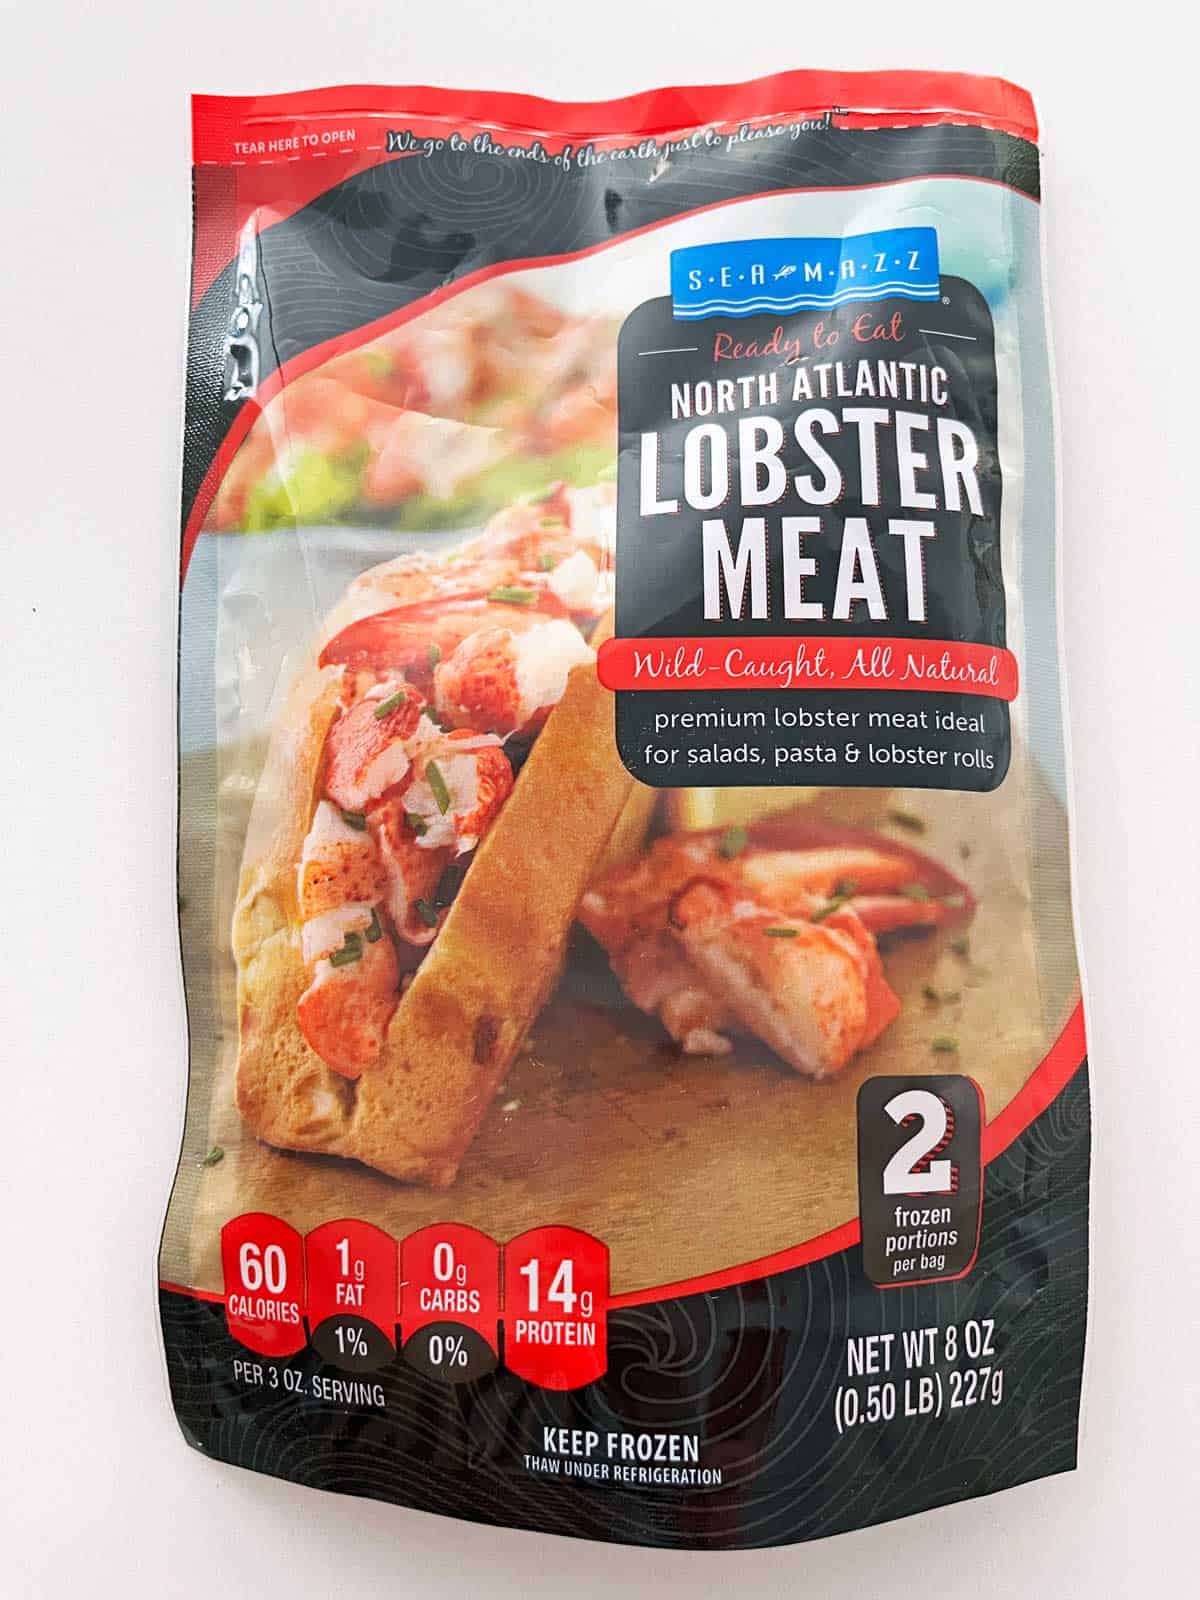 A package of lobster meat.